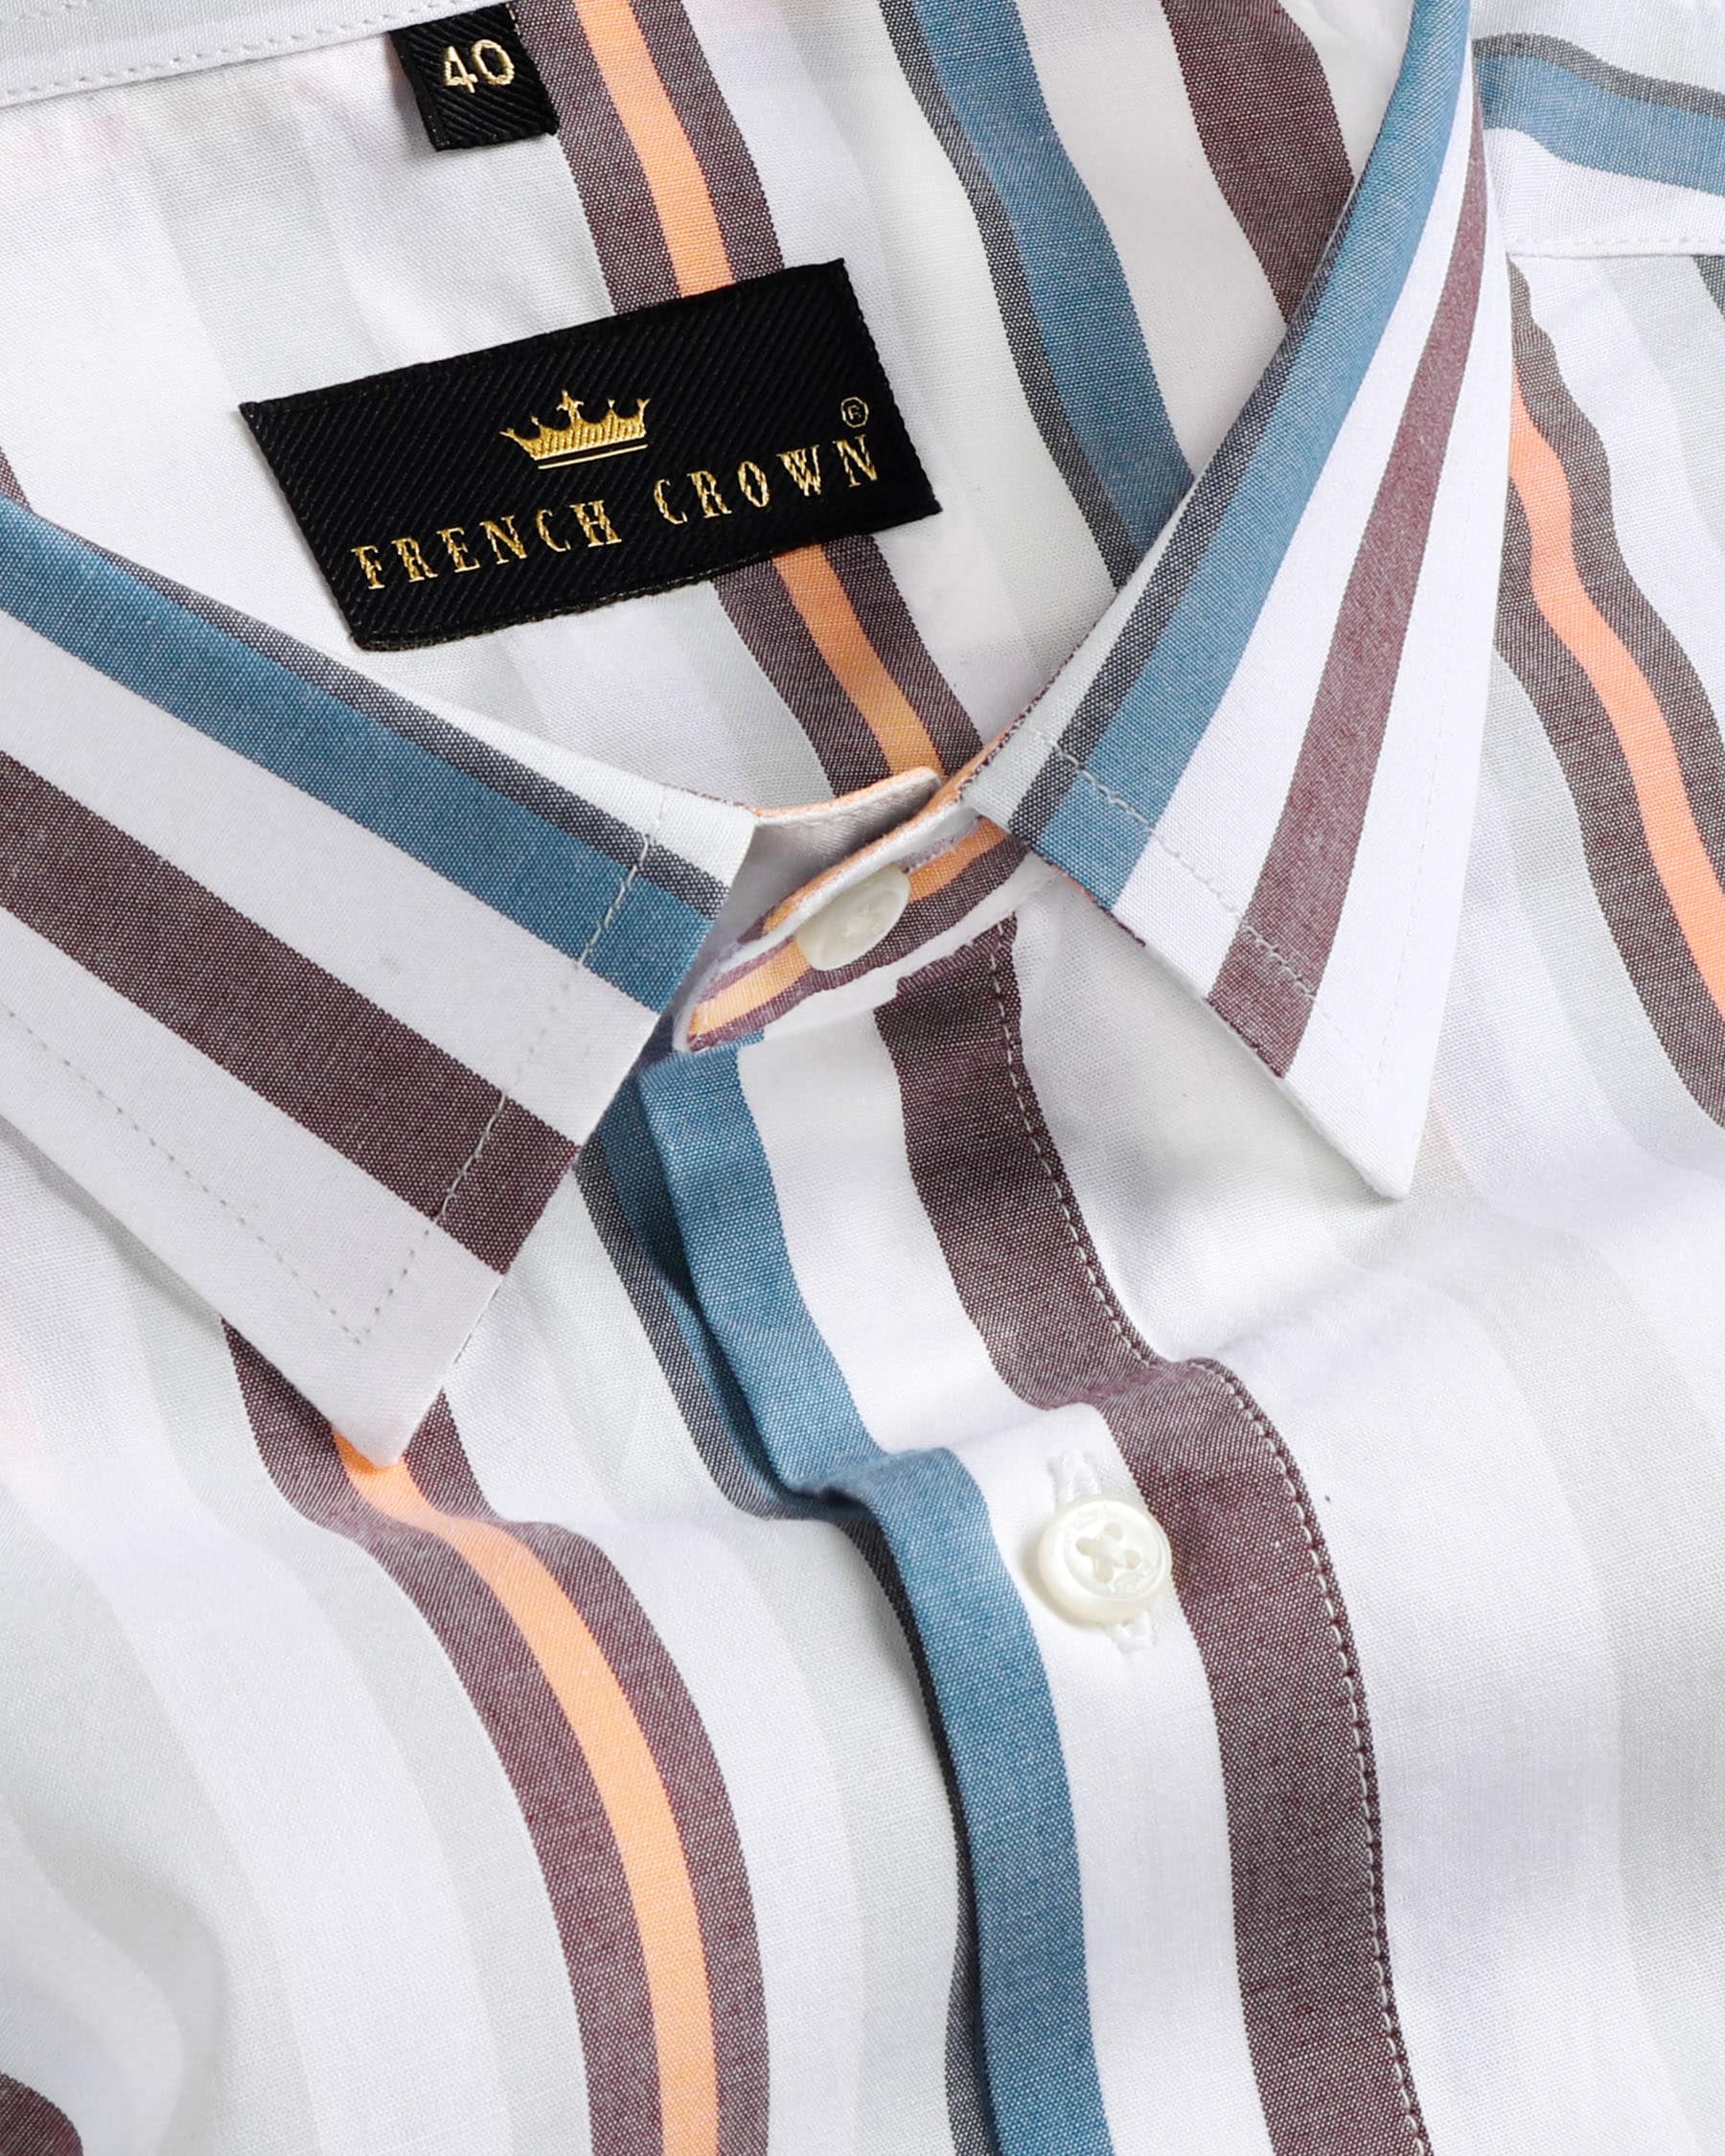 White with Colorful Retro Striped Premium Cotton Shirt 4308-H-42, 4308-44, 4308-48, 4308-46, 4308-52, 4308-H-46, 4308-H-38, 4308-40, 4308-H-40, 4308-H-48, 4308-50, 4308-H-52, 4308-38, 4308-39, 4308-H-39, 4308-H-50, 4308-42, 4308-H-44